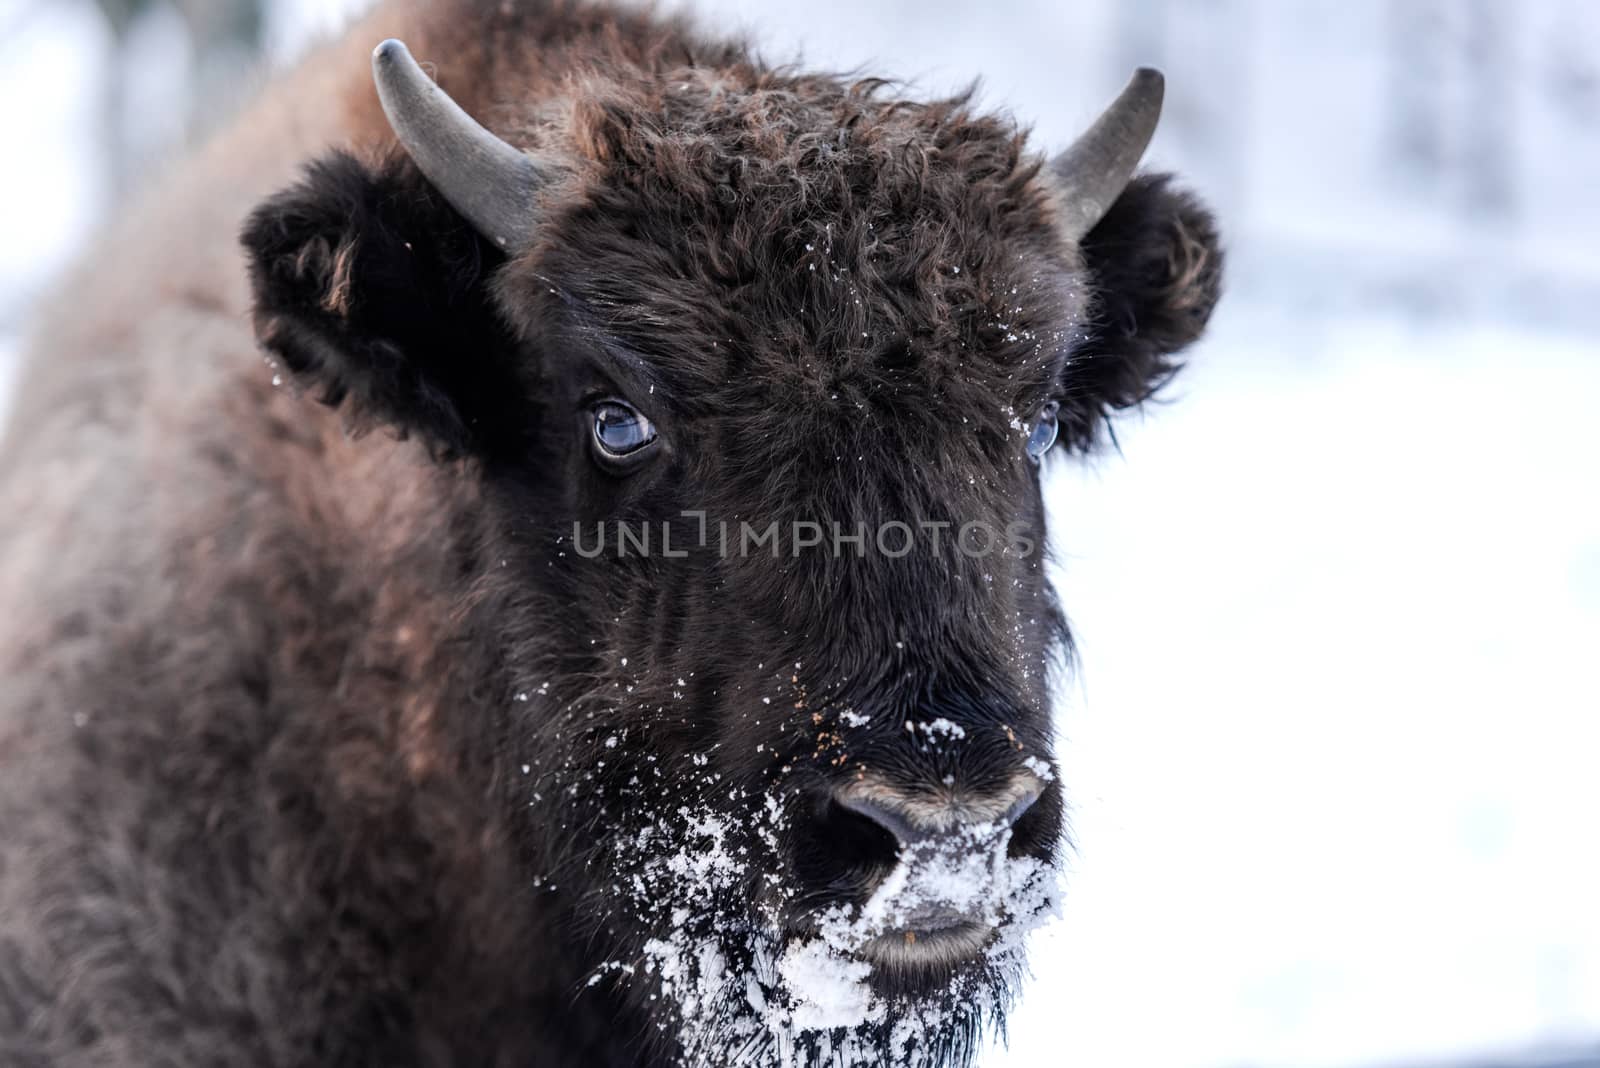 Young European bison (Bison bonasus) Family Portrait Outdoor at  by merc67